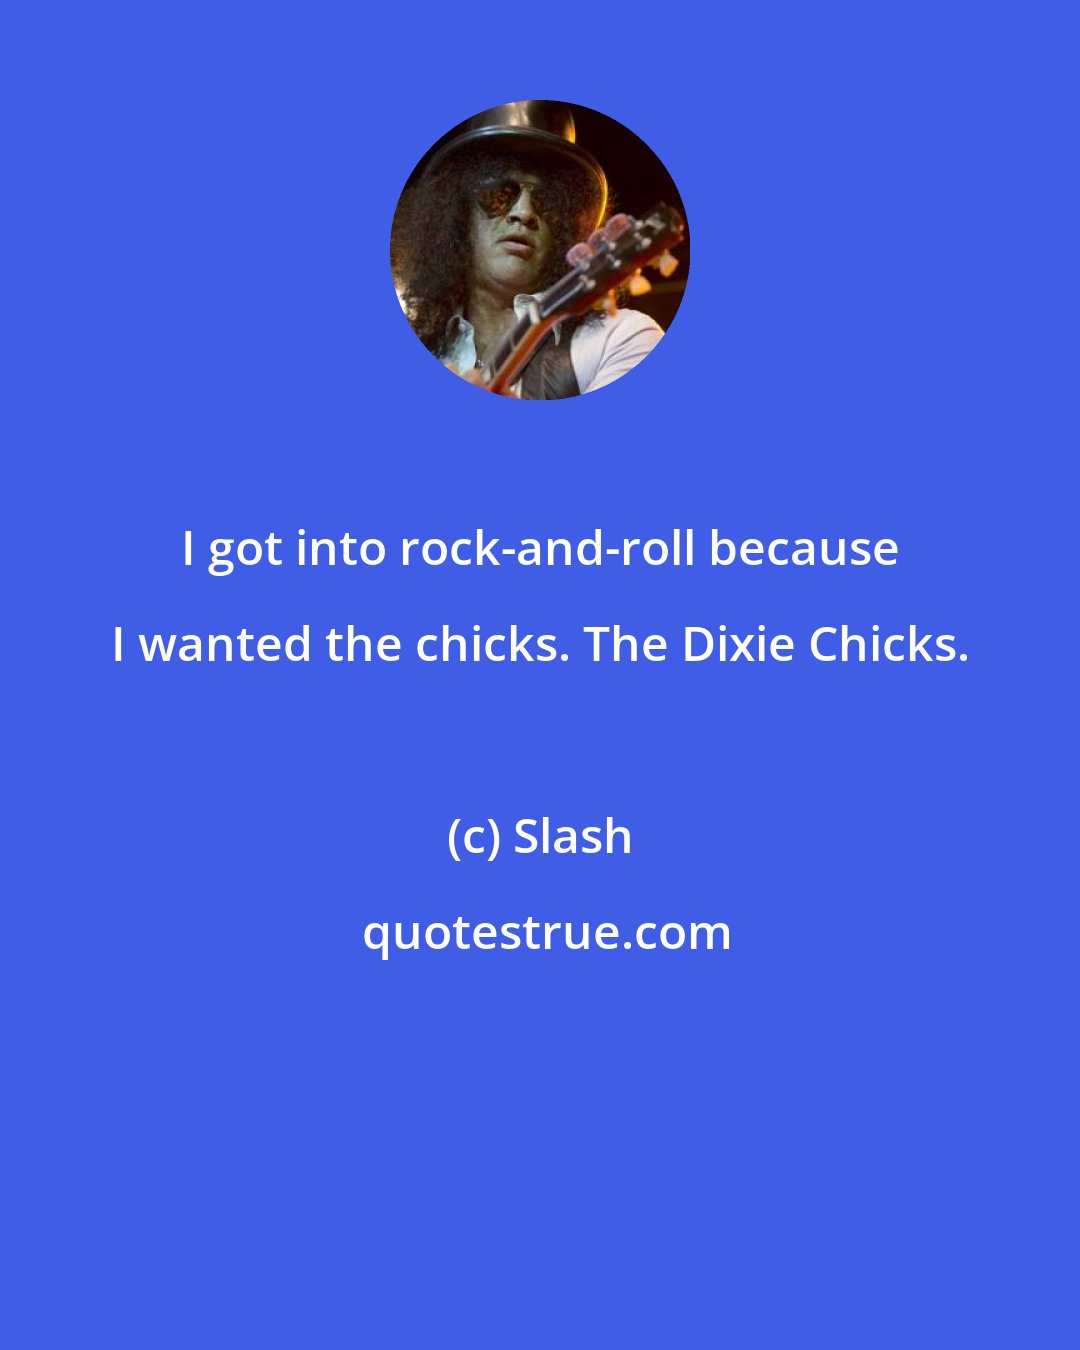 Slash: I got into rock-and-roll because I wanted the chicks. The Dixie Chicks.